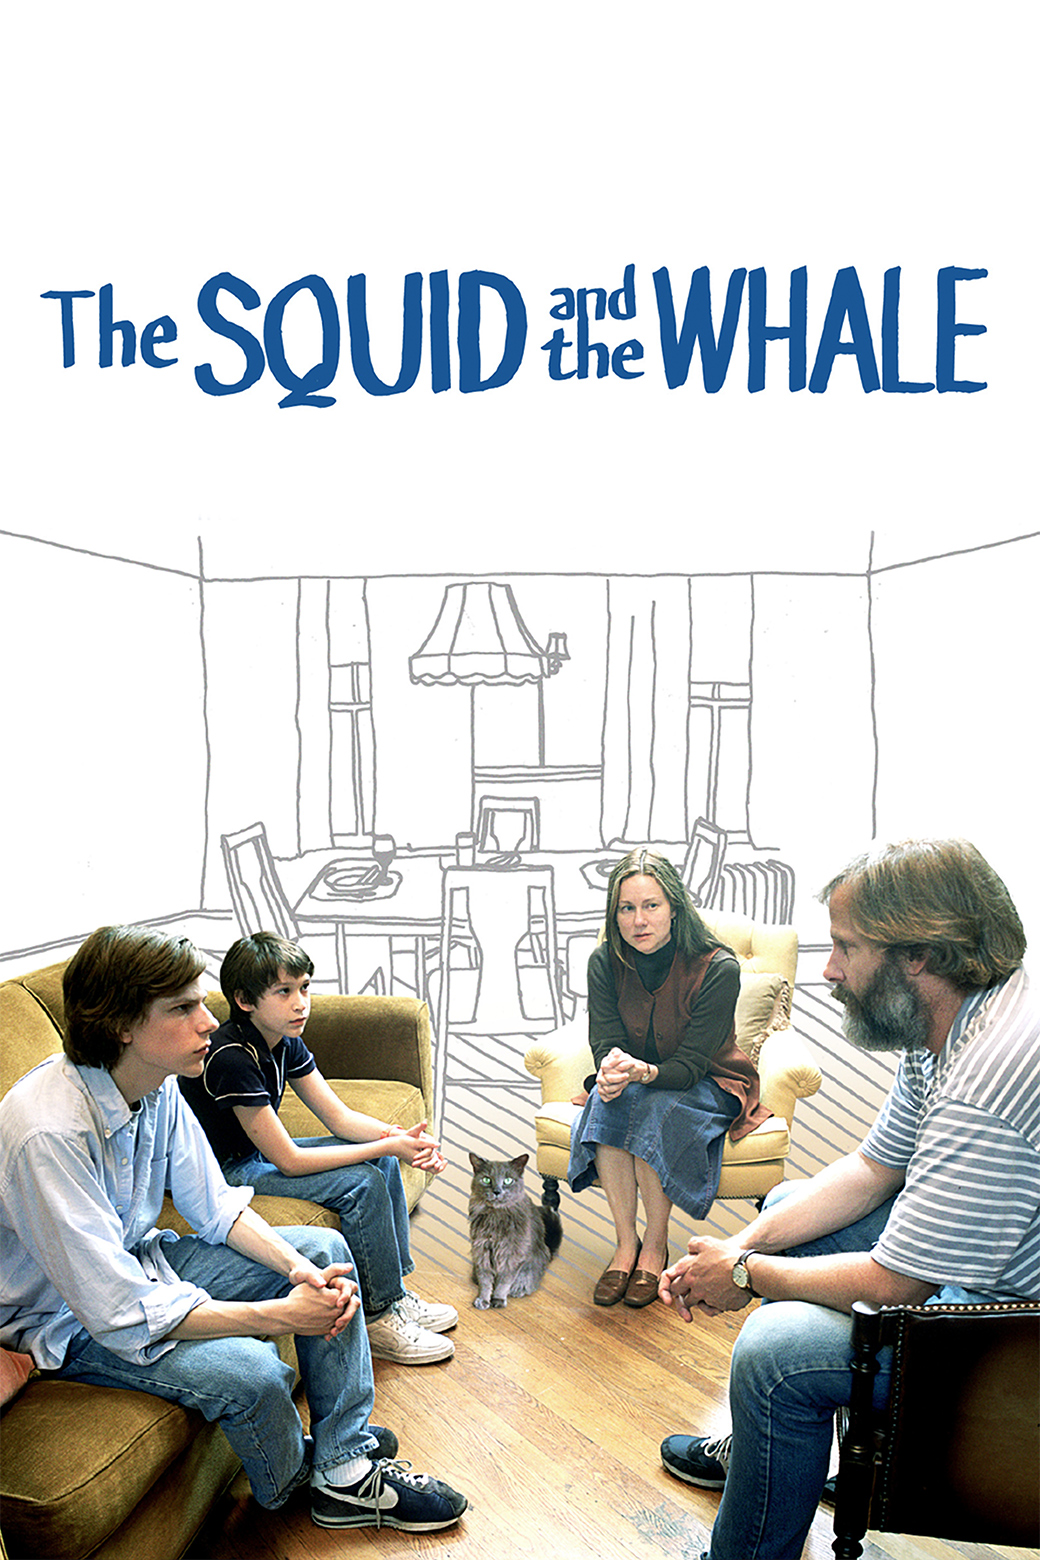 The Squid and The Whale